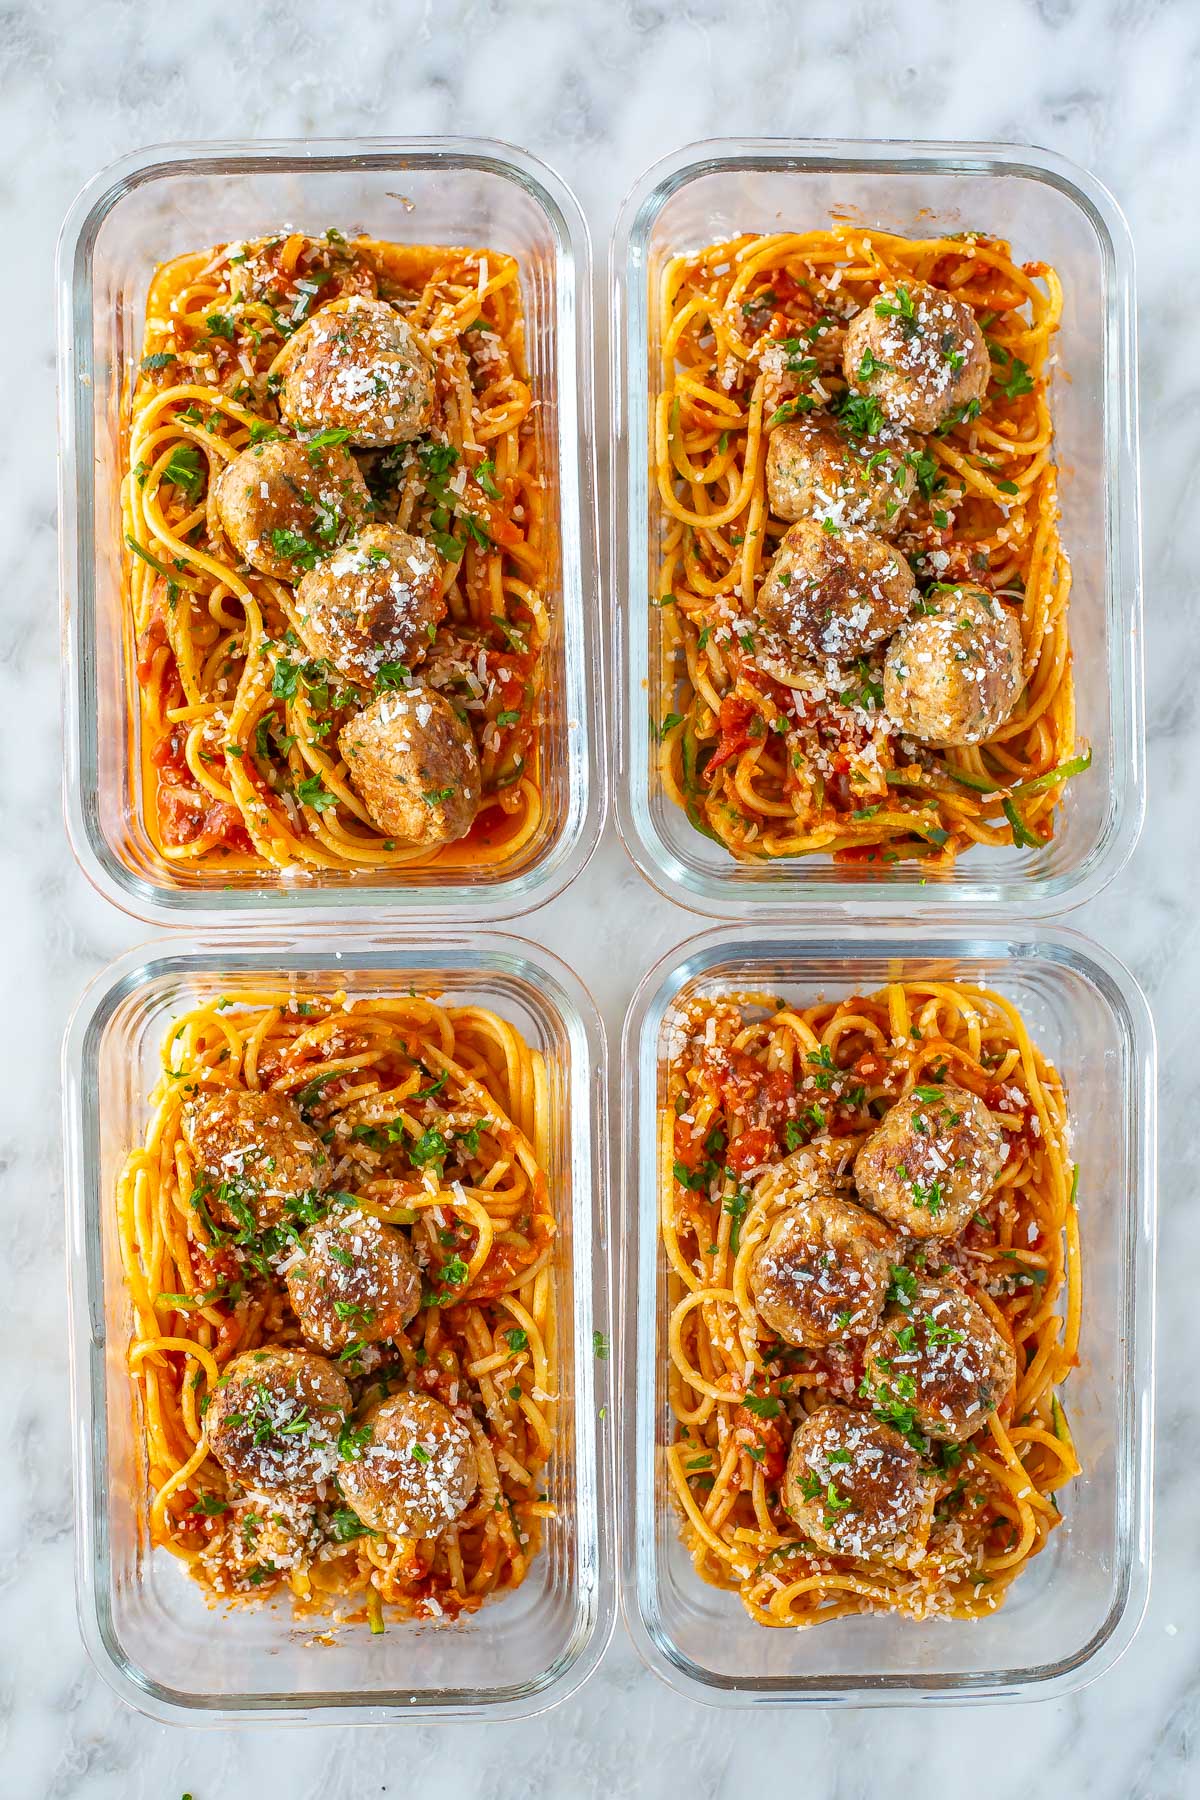 Four meal prep containers, each with a serving of turkey meatballs with pasta and zucchini noodles.